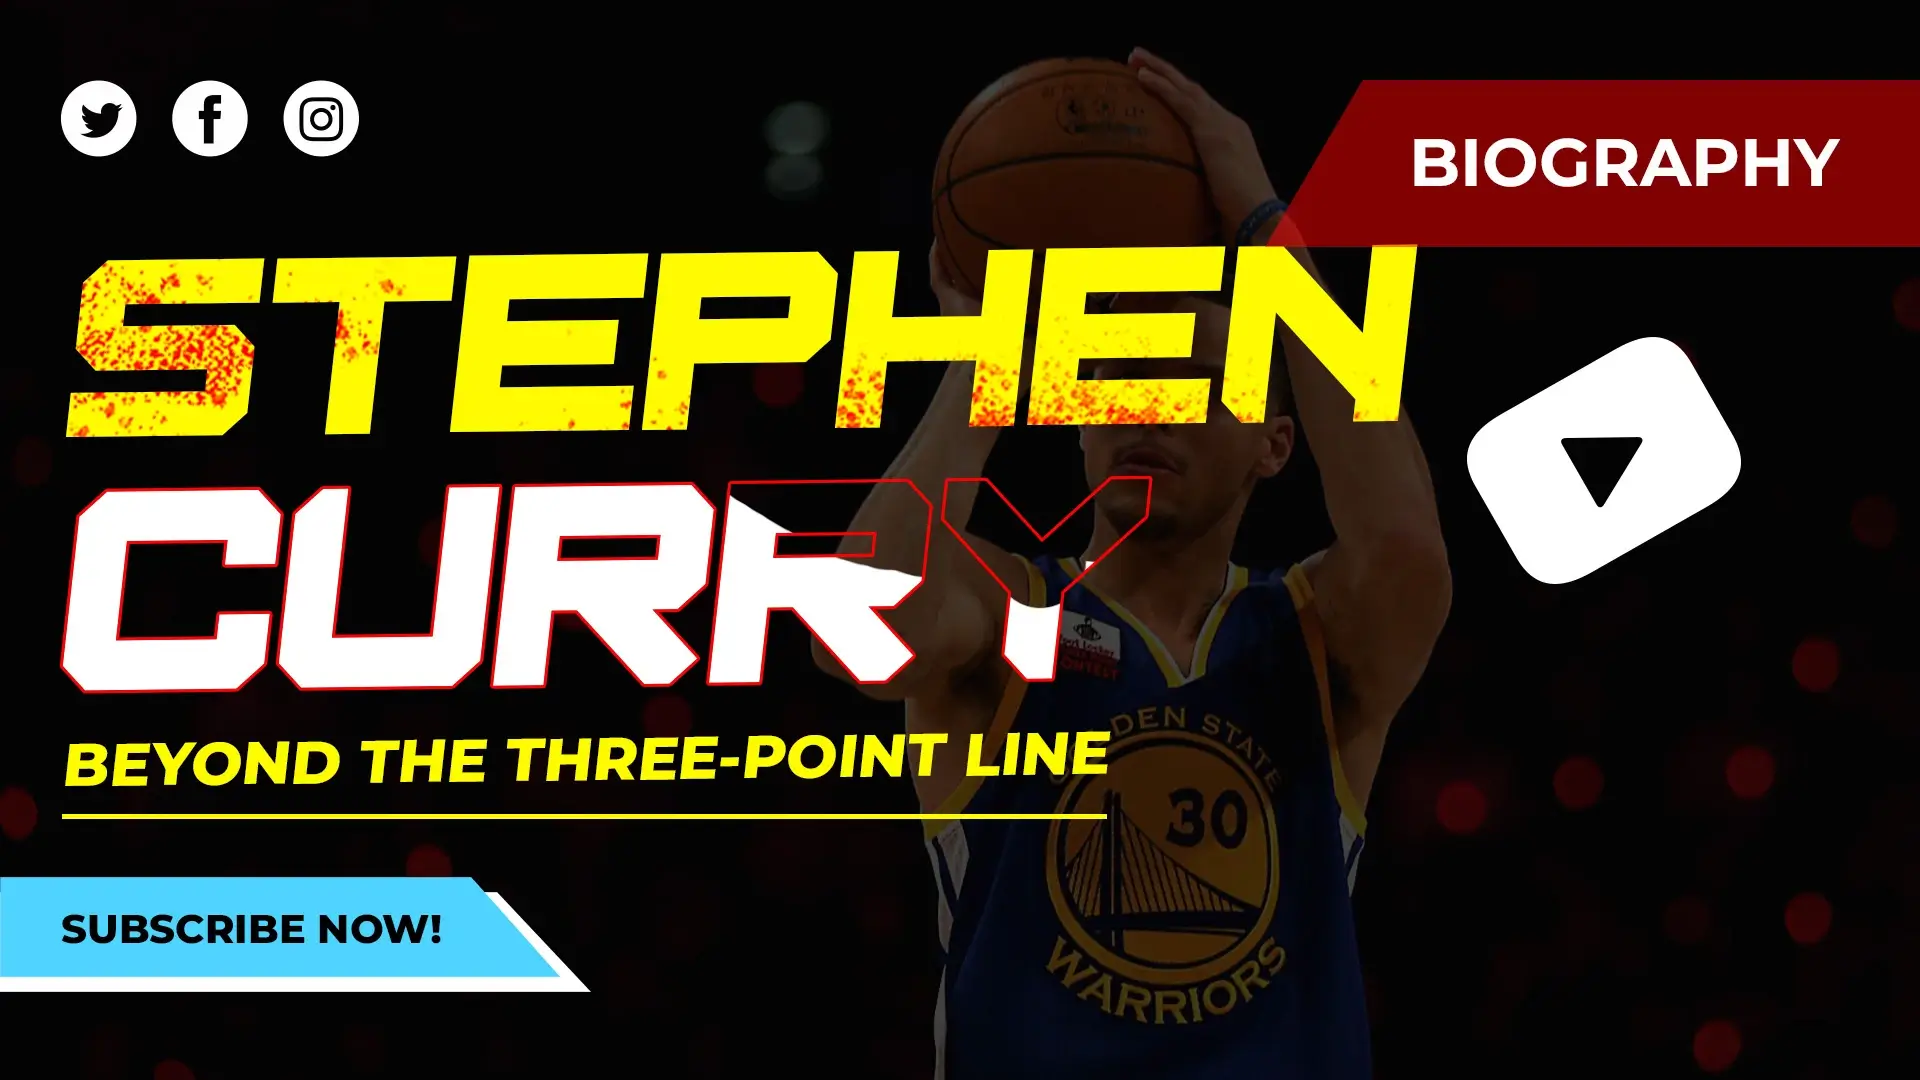 Stephen Curry Biography: Beyond the Three-Point Line